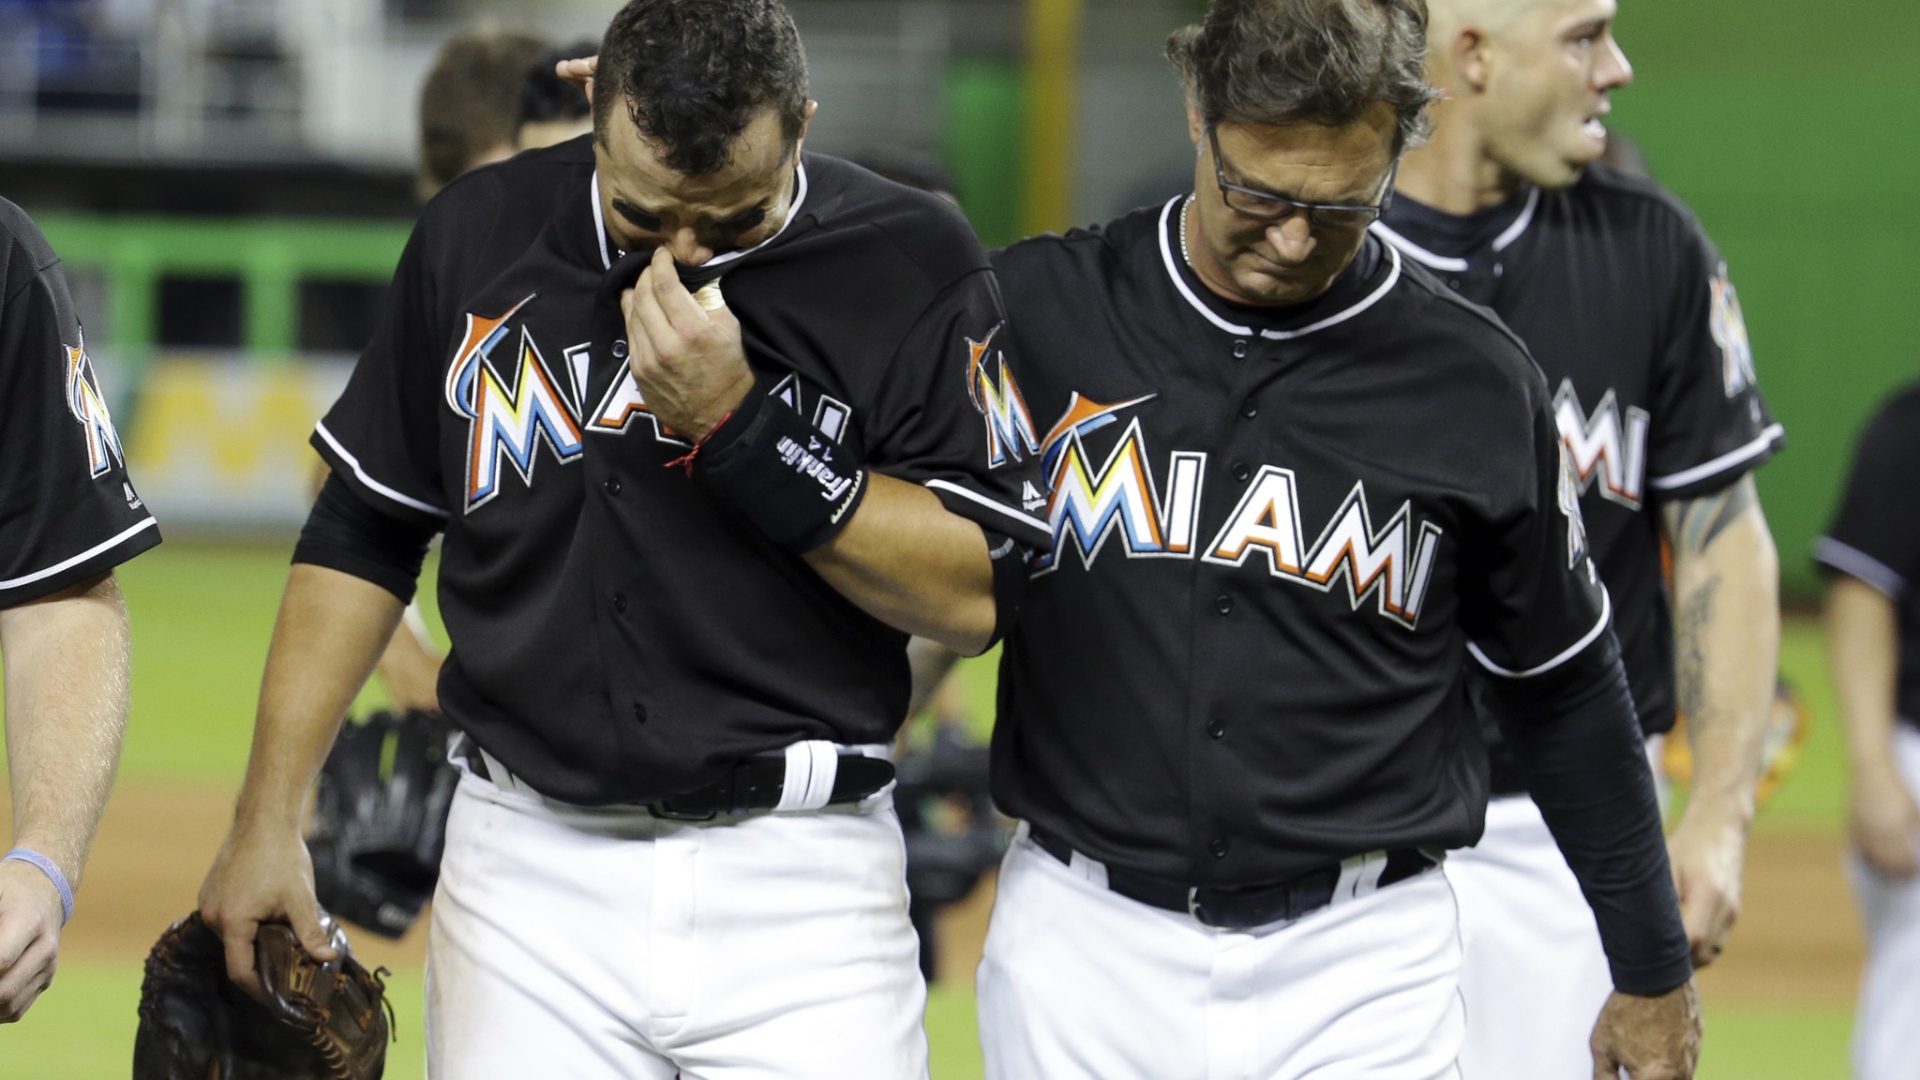 Latest videos on the passing of Marlins pitcher and two others